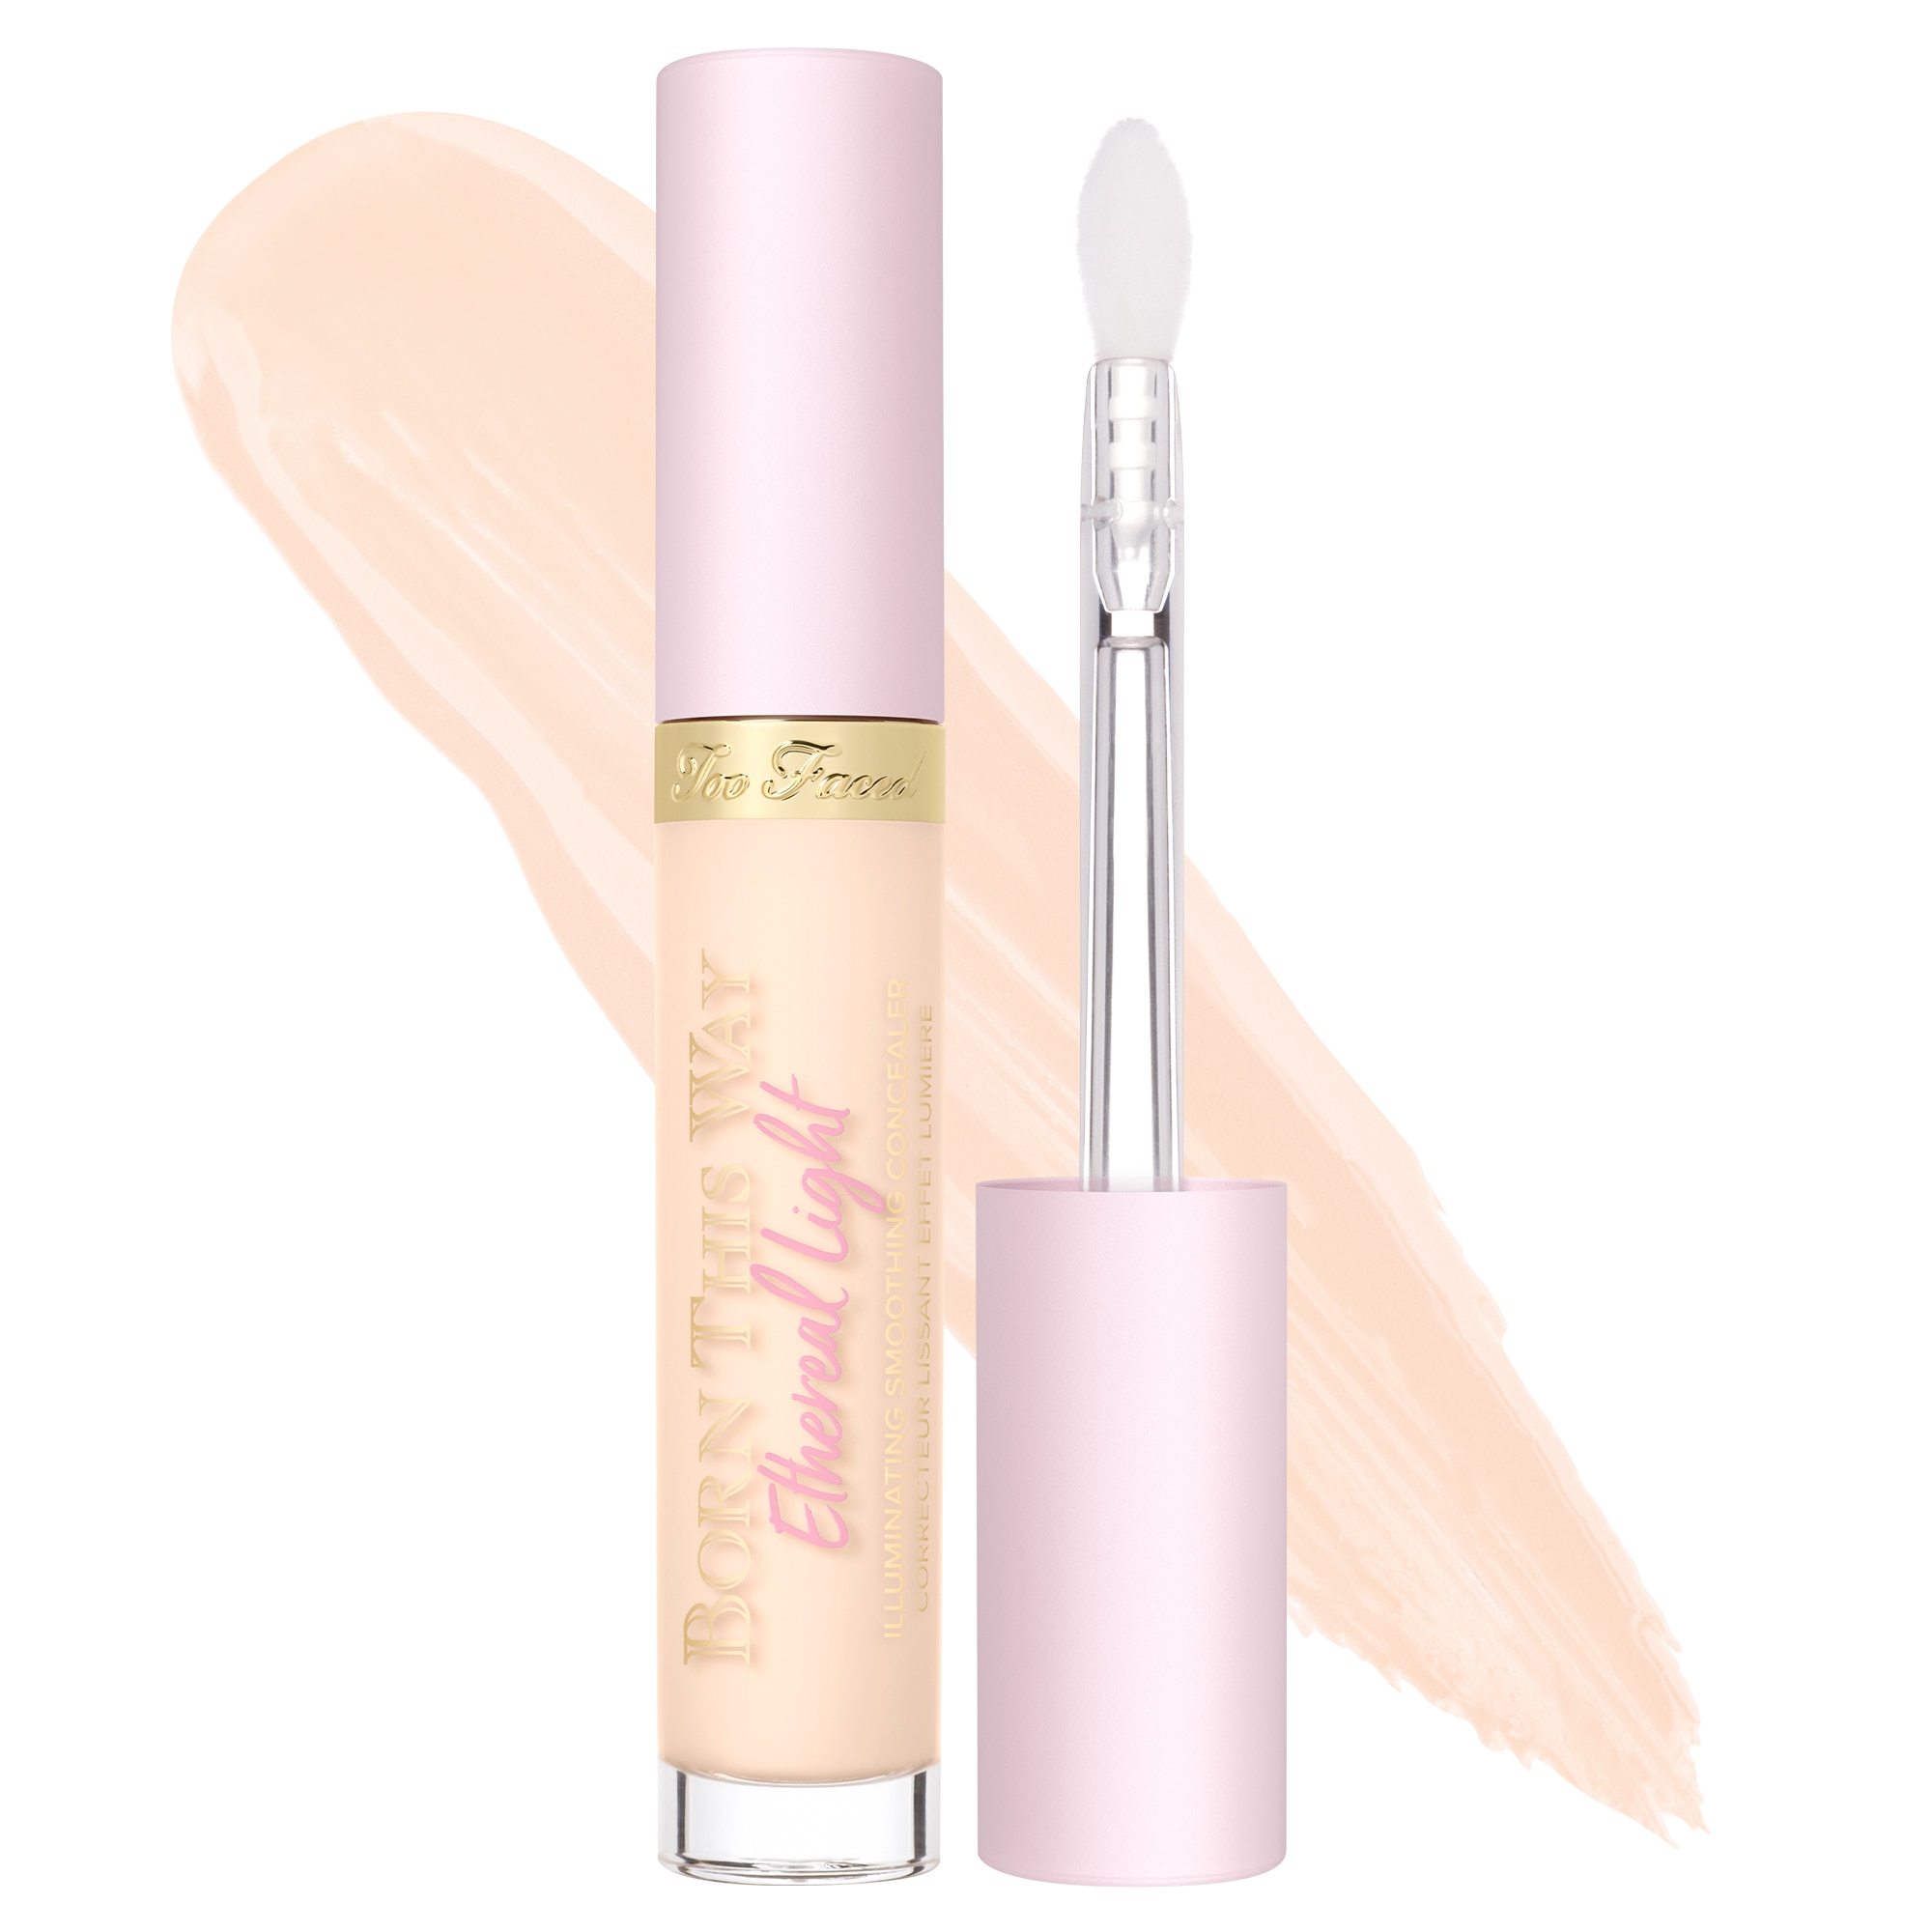 A too faced Born This Way Ethereal Light Illuminating Smoothing Concealer